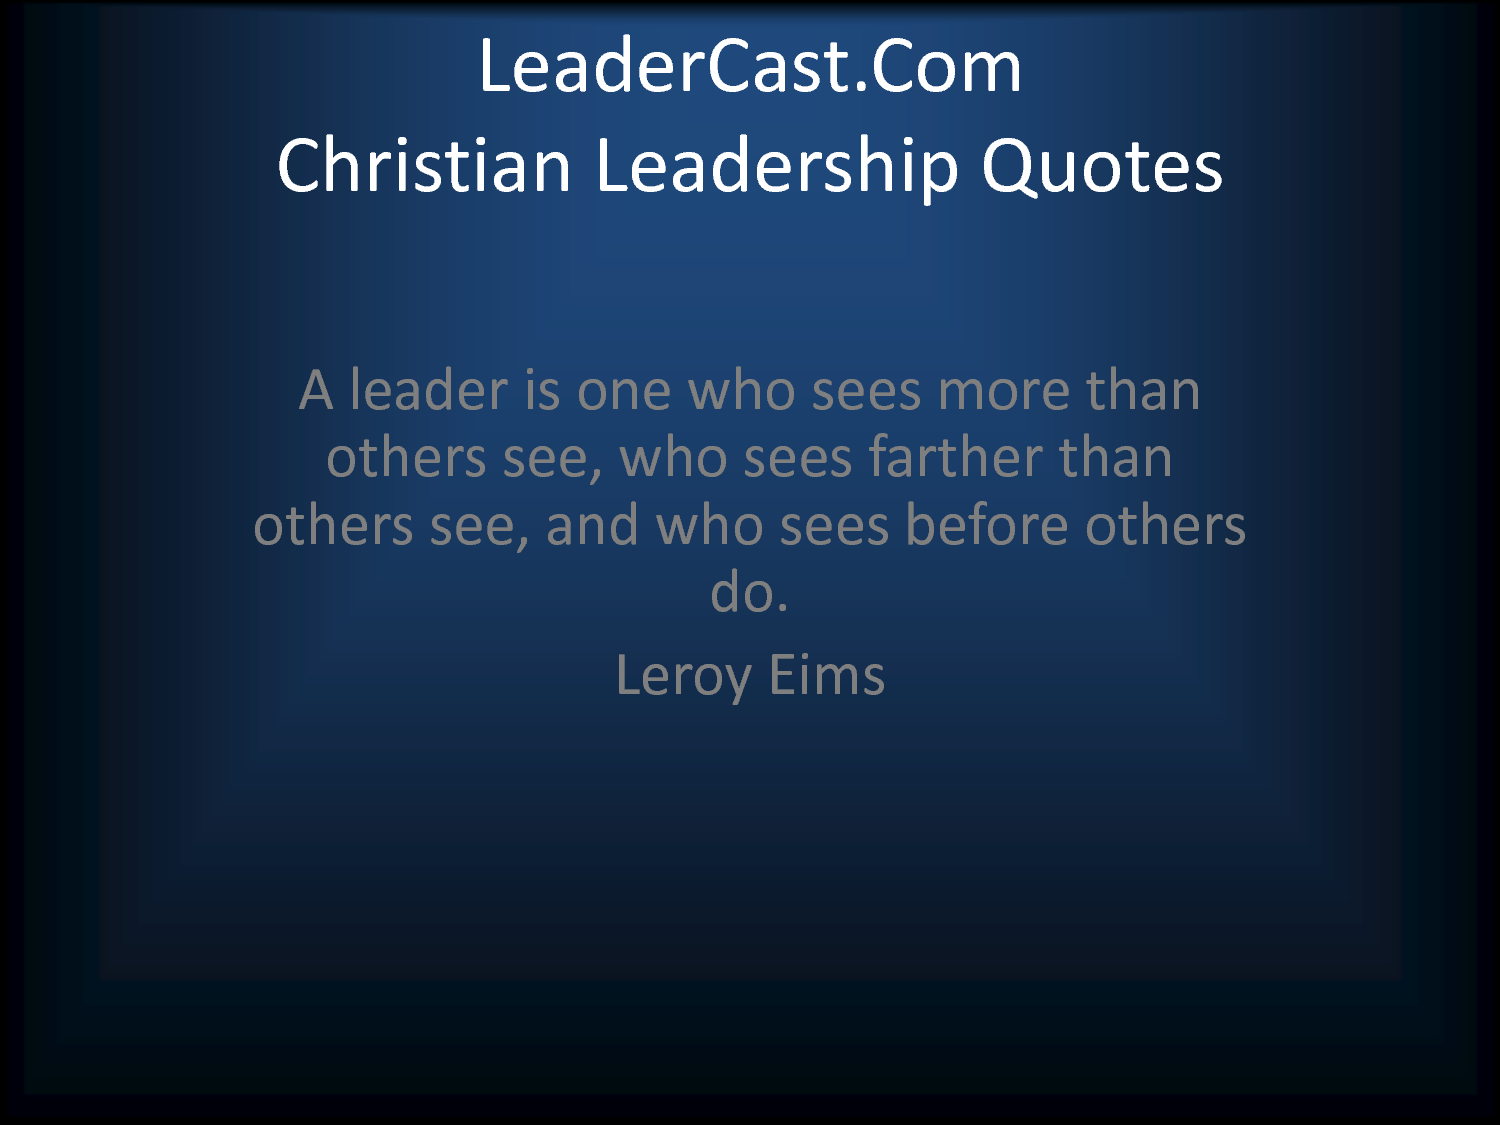 A leader is one who sees more than others see, who sees farther than others see, and who sees before others do  - John Maxwell